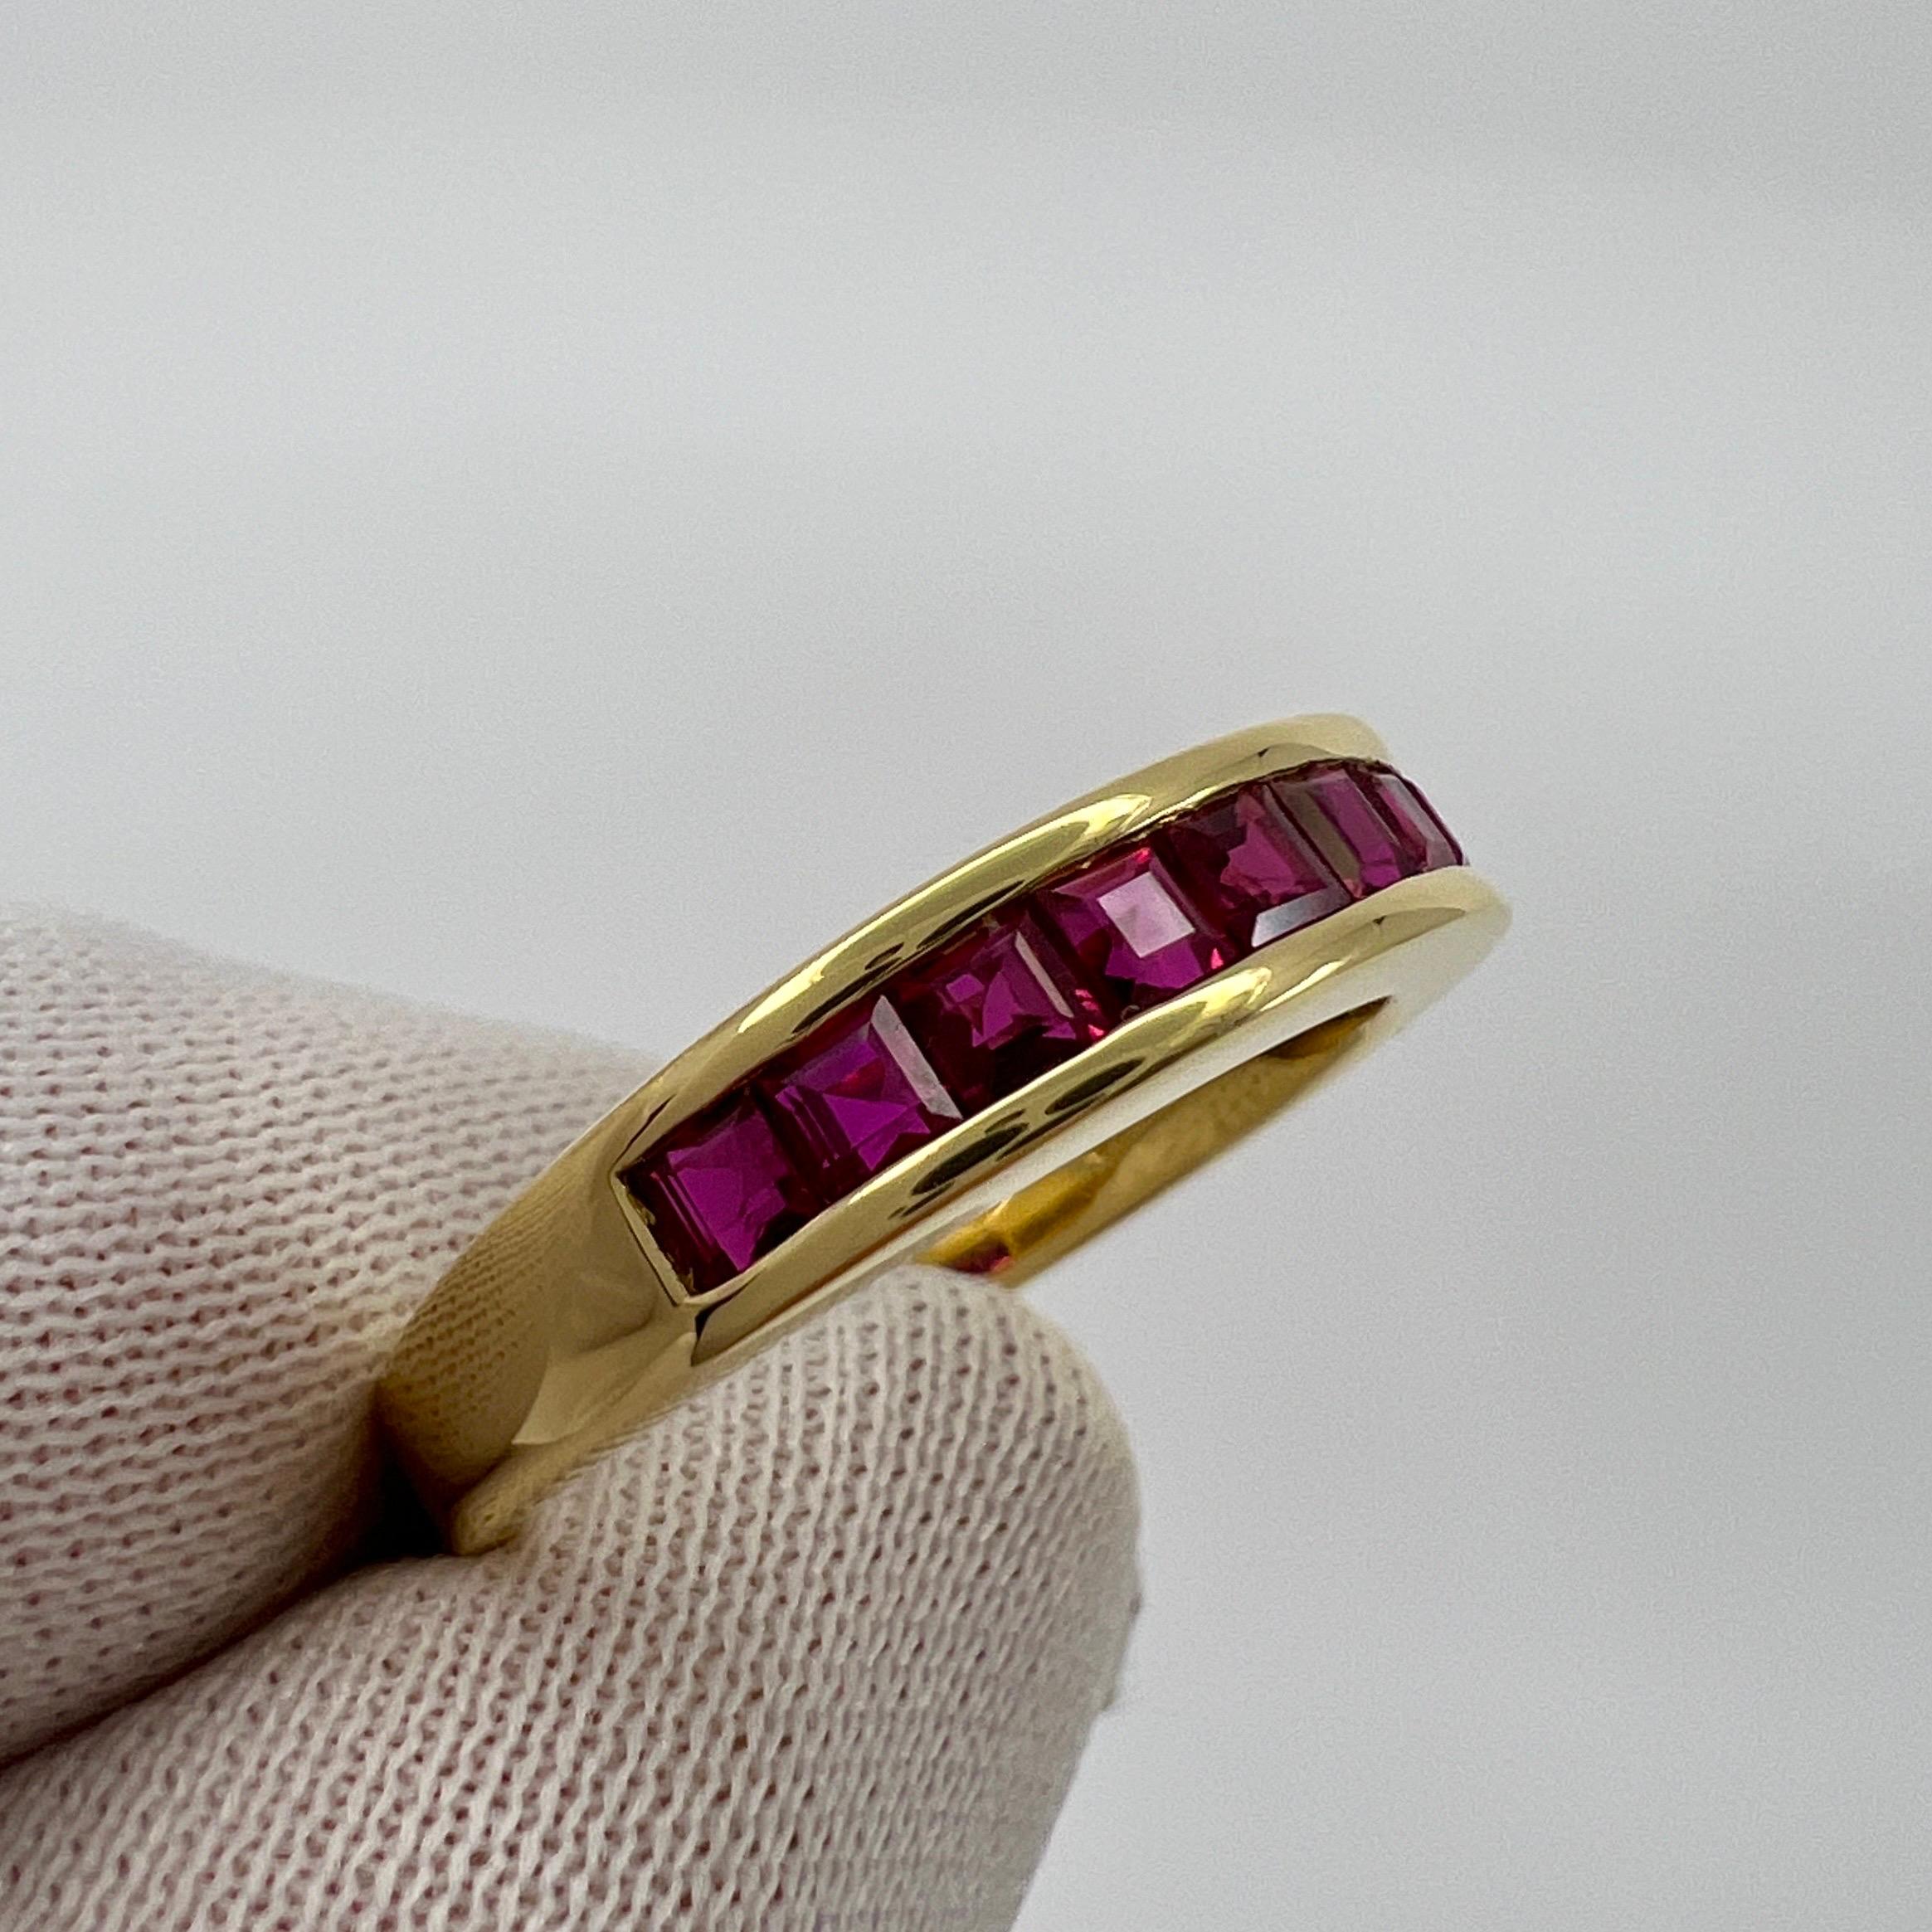 Tiffany & Co. Red Ruby Square Princess Cut 18k Yellow Gold Eternity Band Ring 3